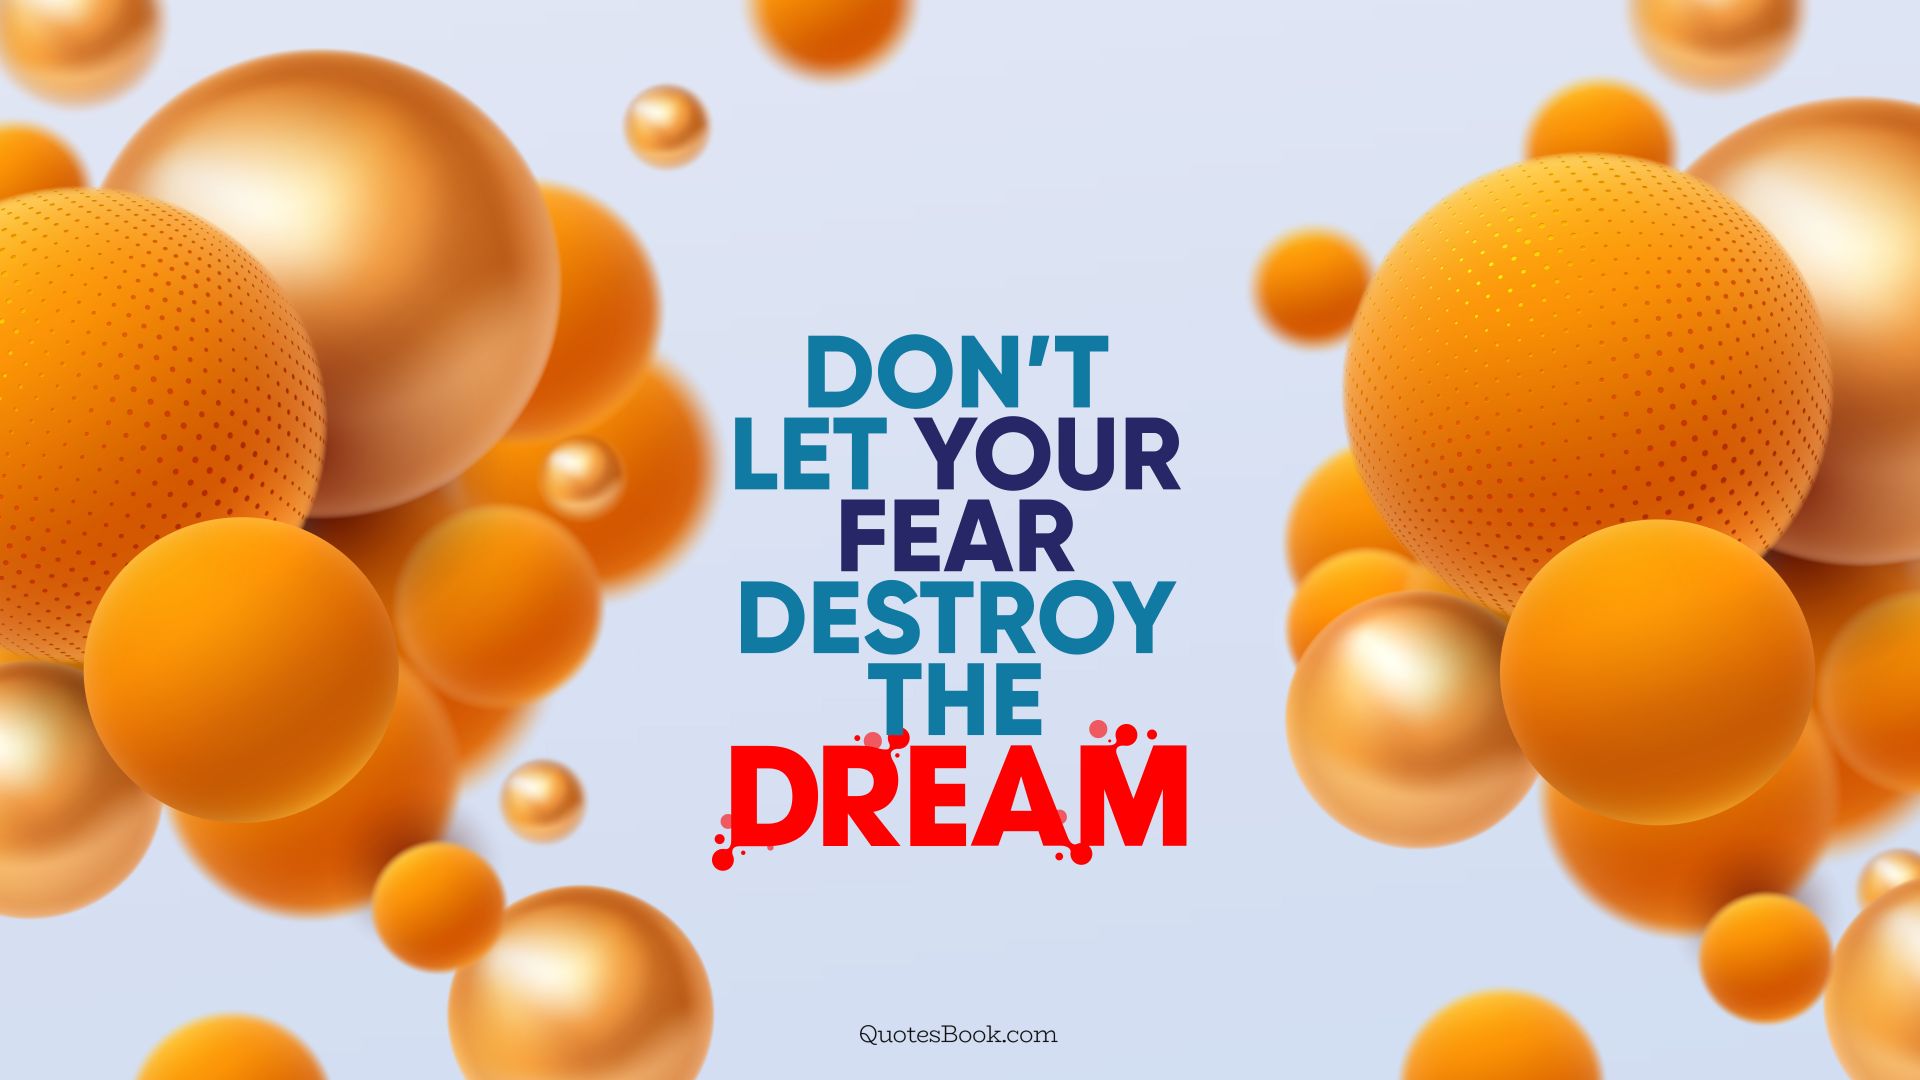 Don’t let your fear destroy the dream. - Quote by QuotesBook